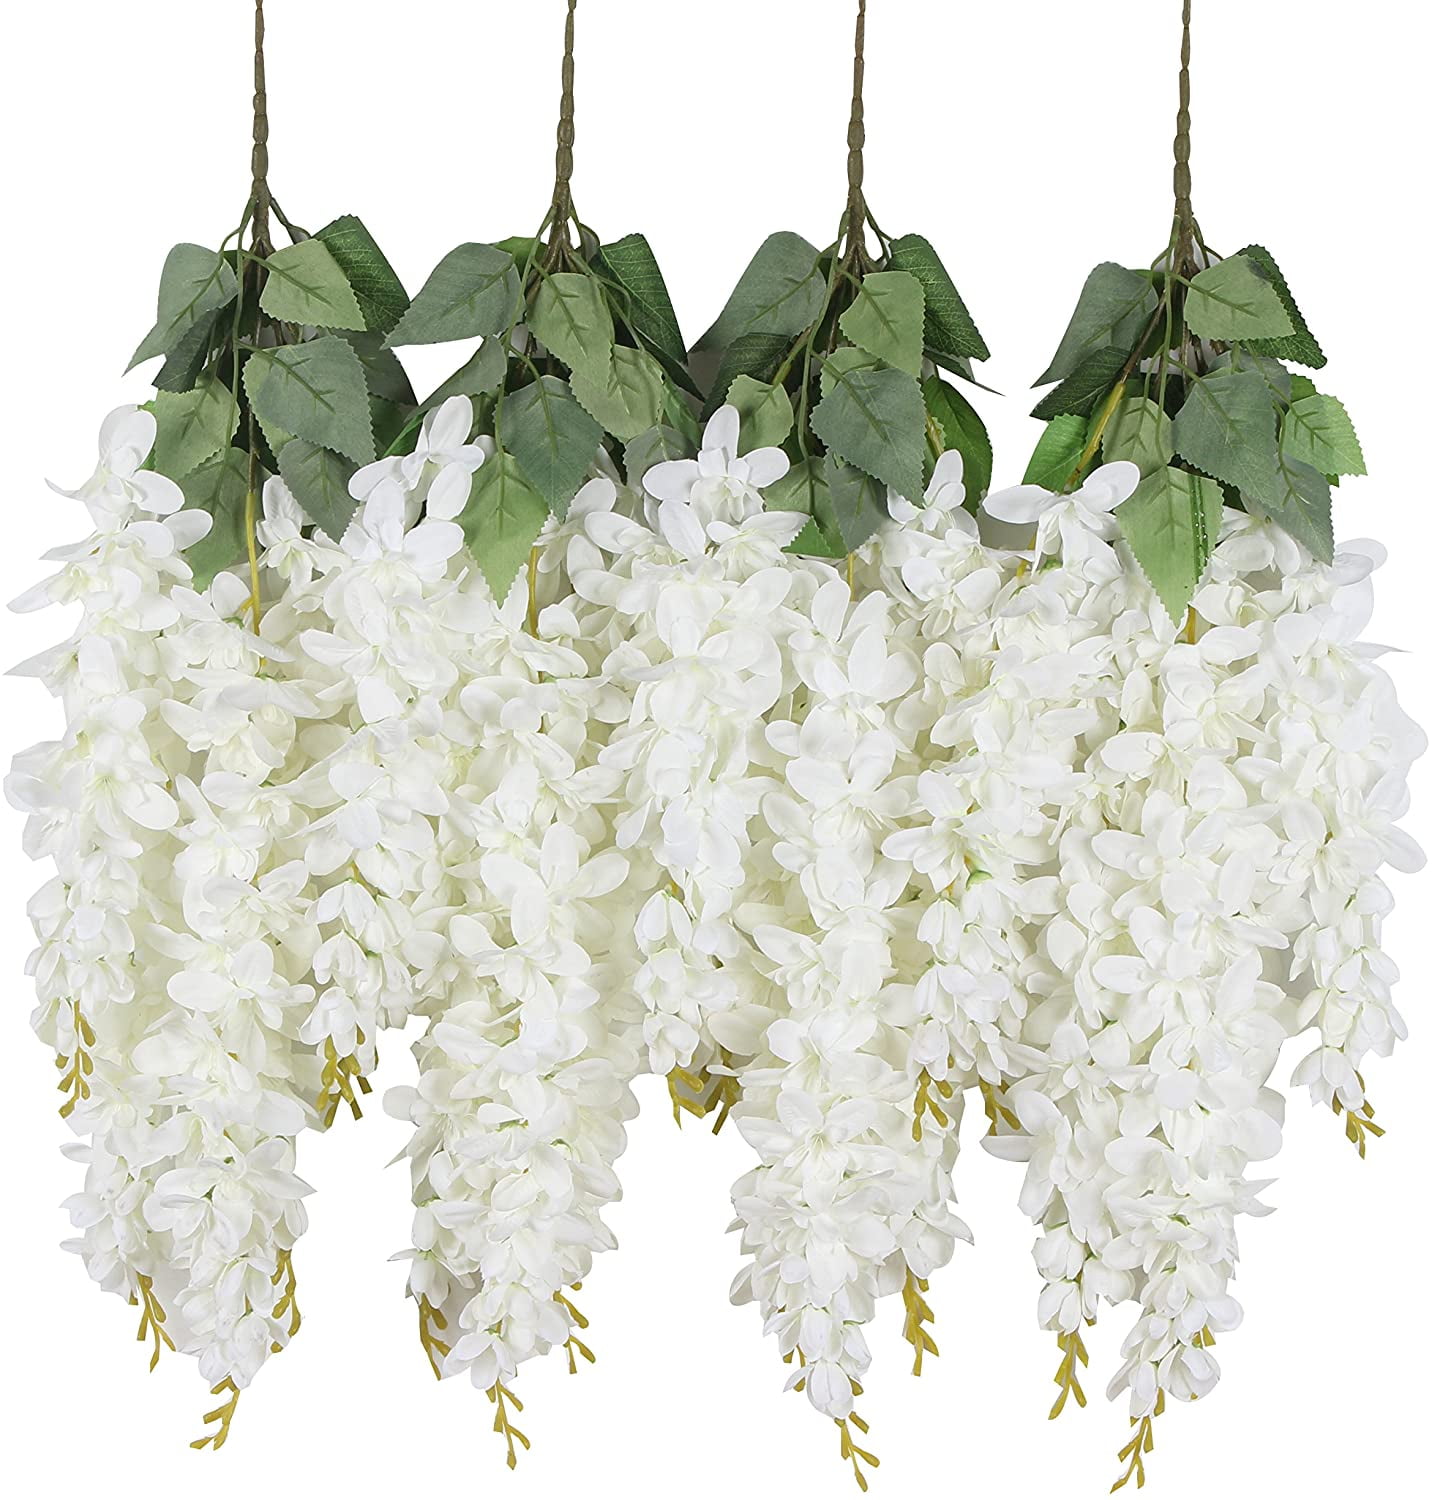 2 Bunches White Wisteria Garland Fake Silk Flowers Vines For Wedding Decorations